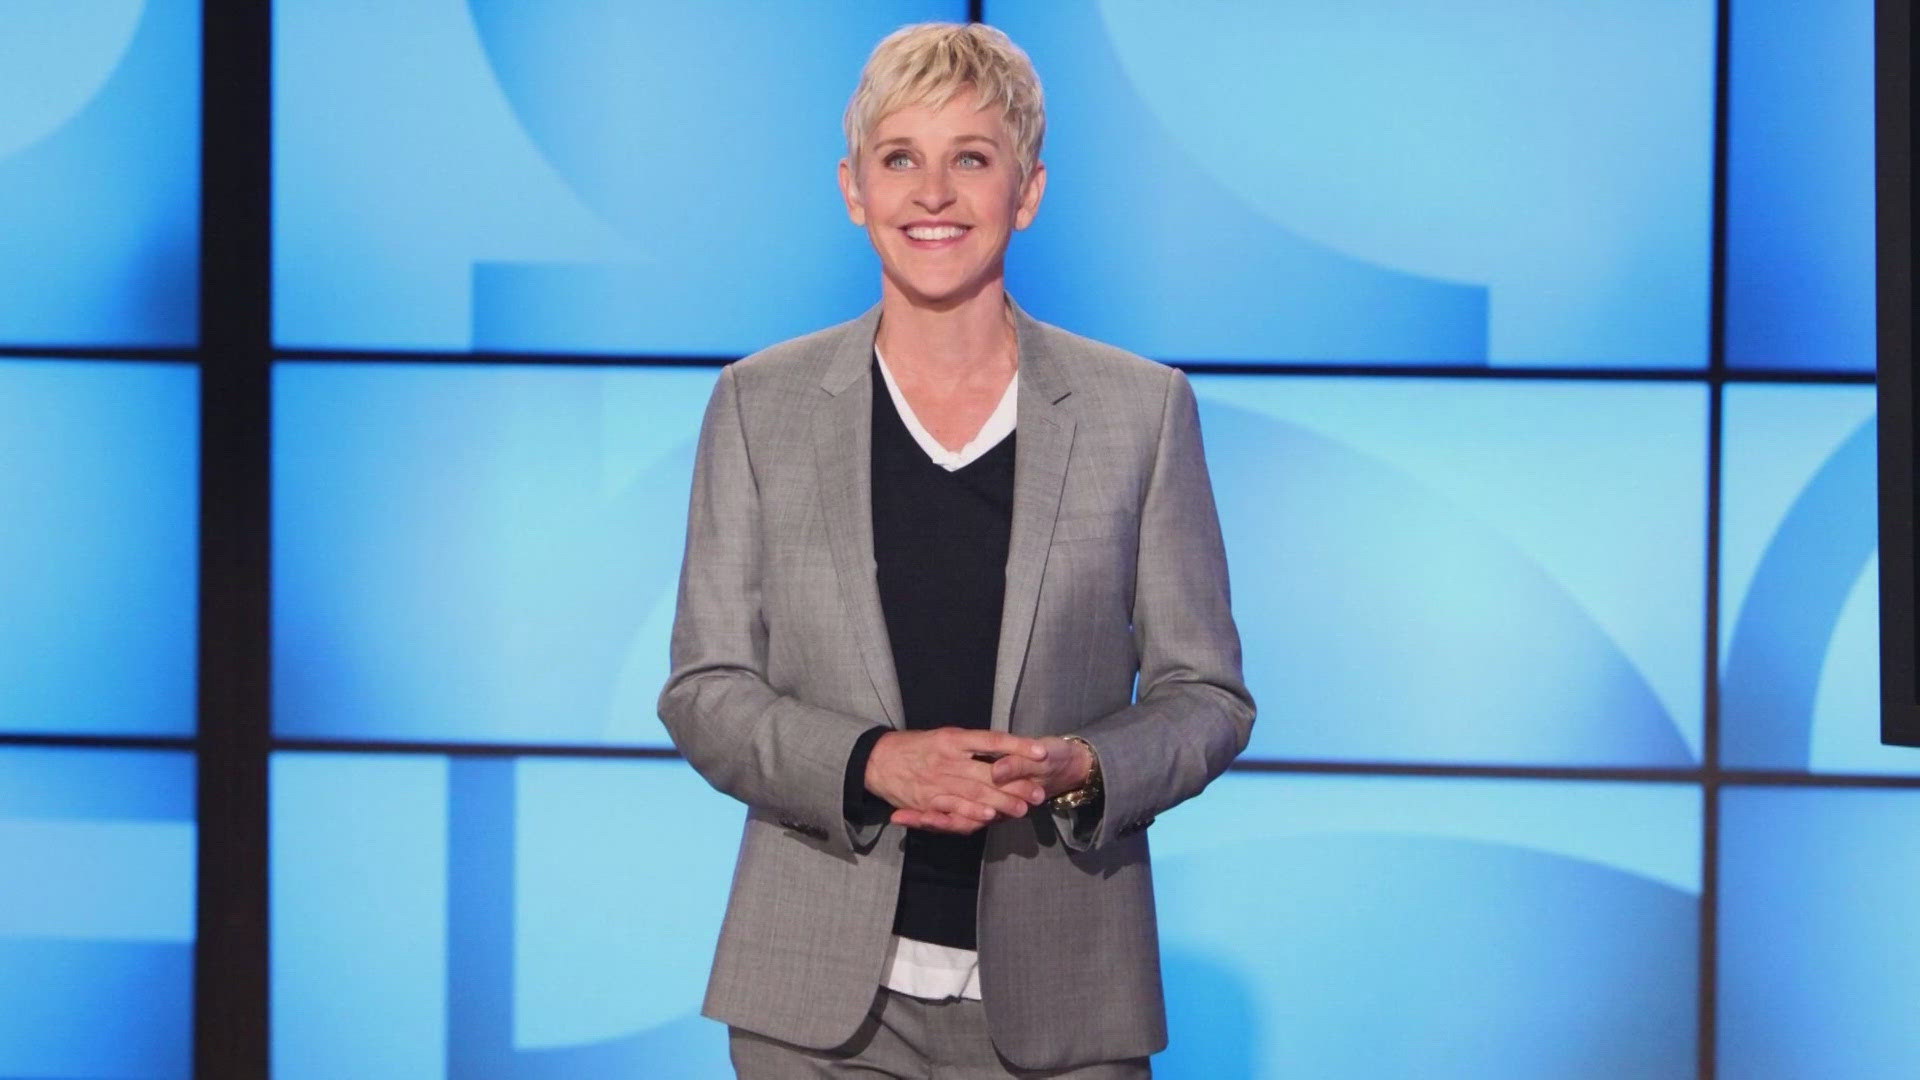 DeGeneres was supposed to hit the stage in Fair Park.